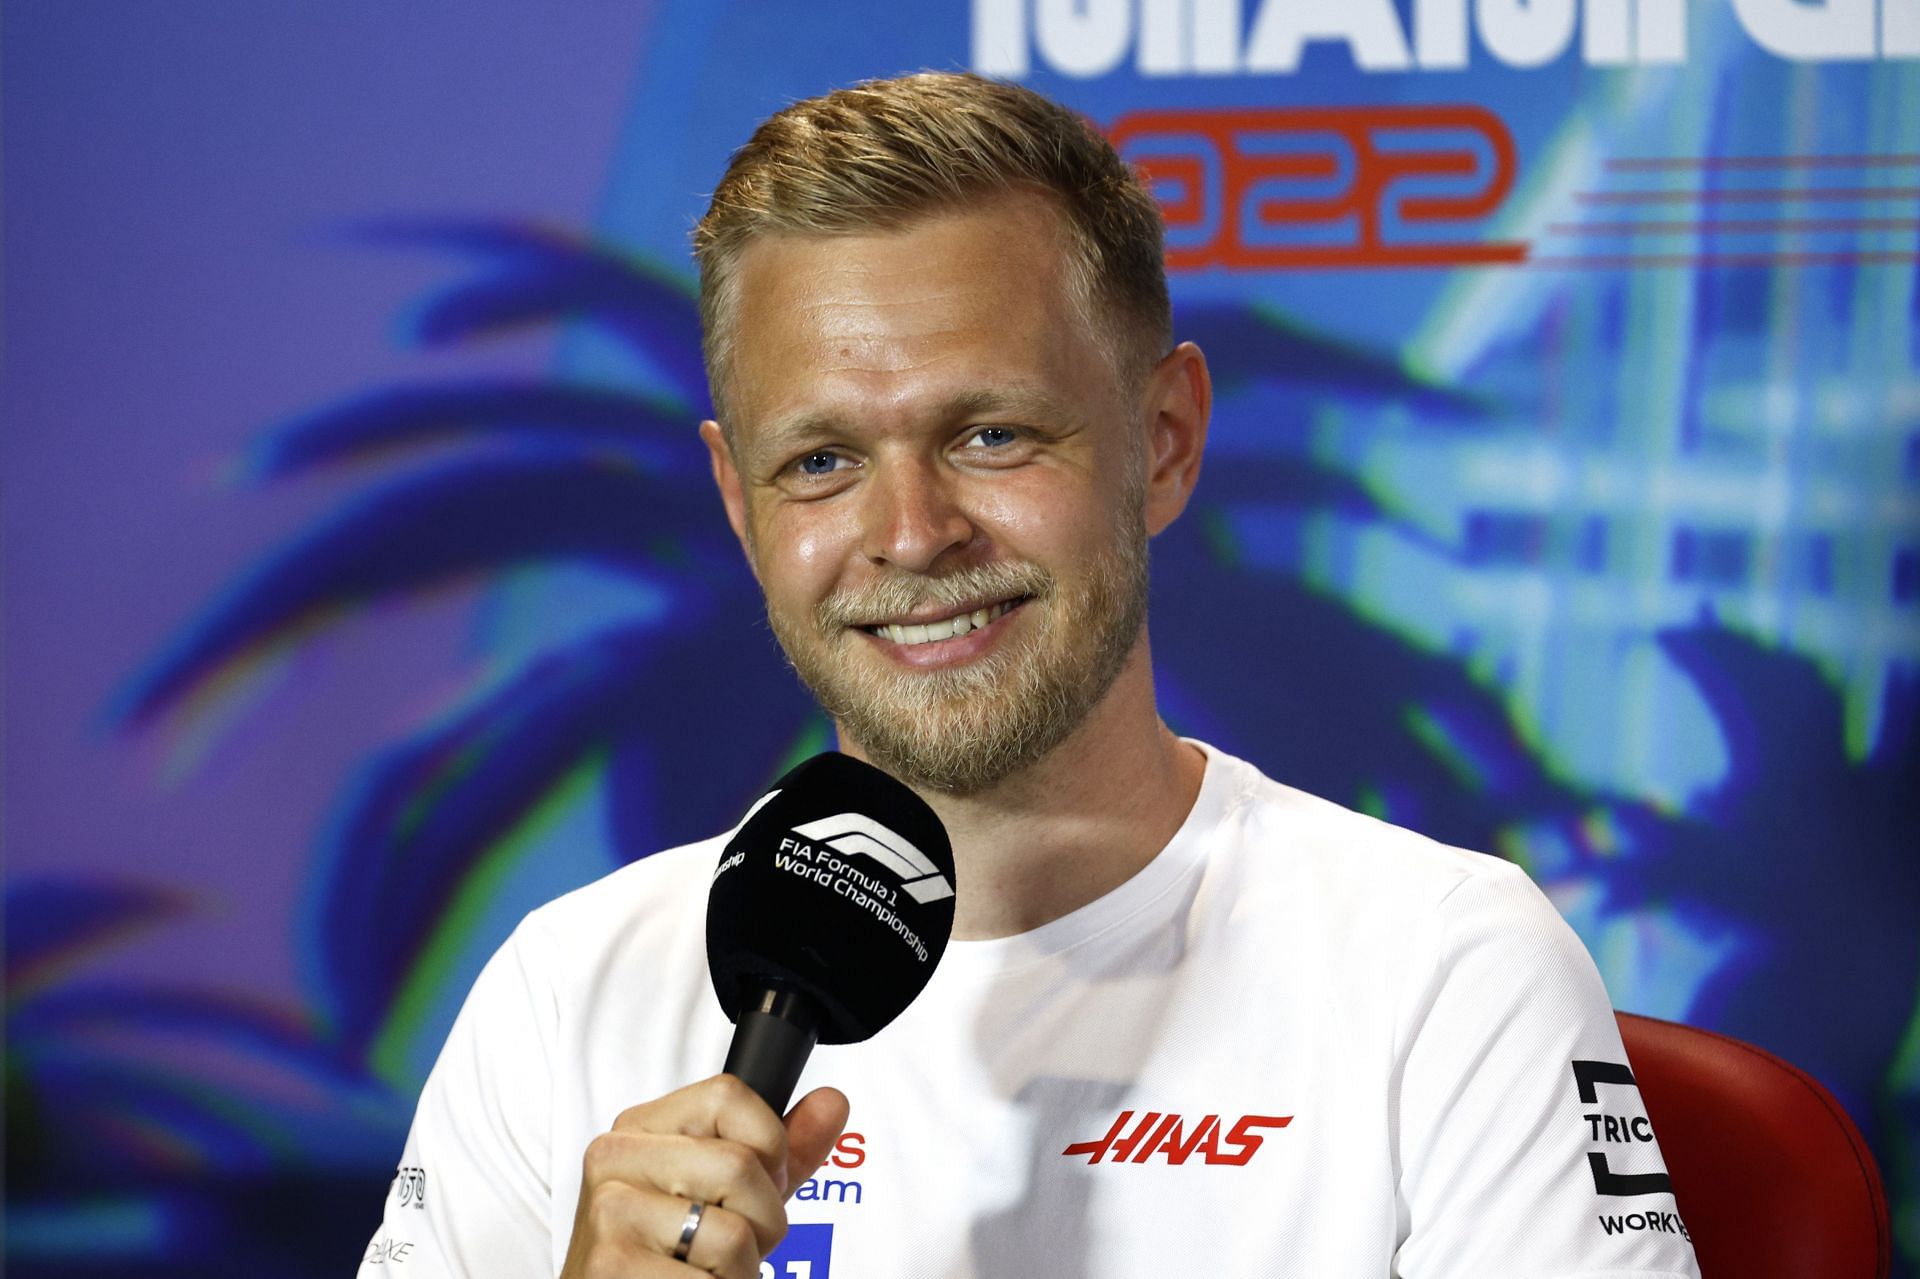 Magnussen will have to take off his wedding ring while racing according to the new regulations